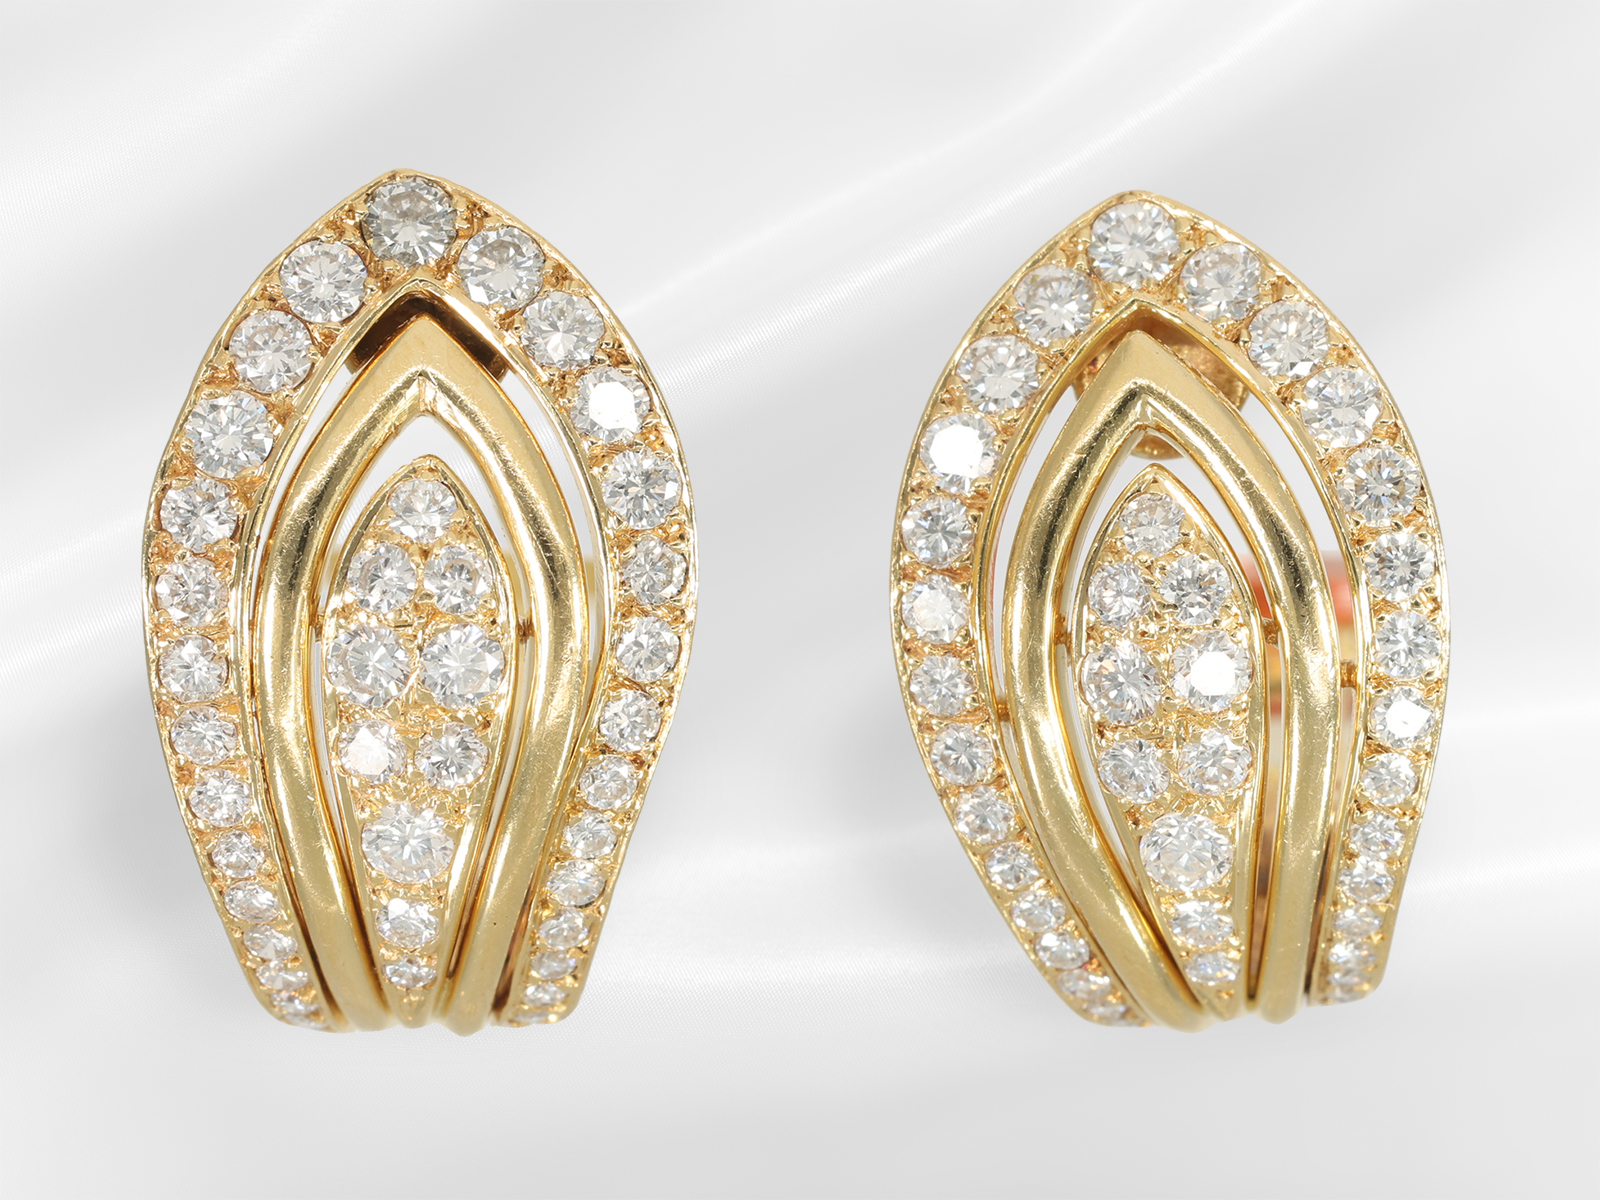 Earrings: high-quality vintage designer brilliant-cut diamond jewellery by Cartier, approx. 1.8ct - Image 2 of 4